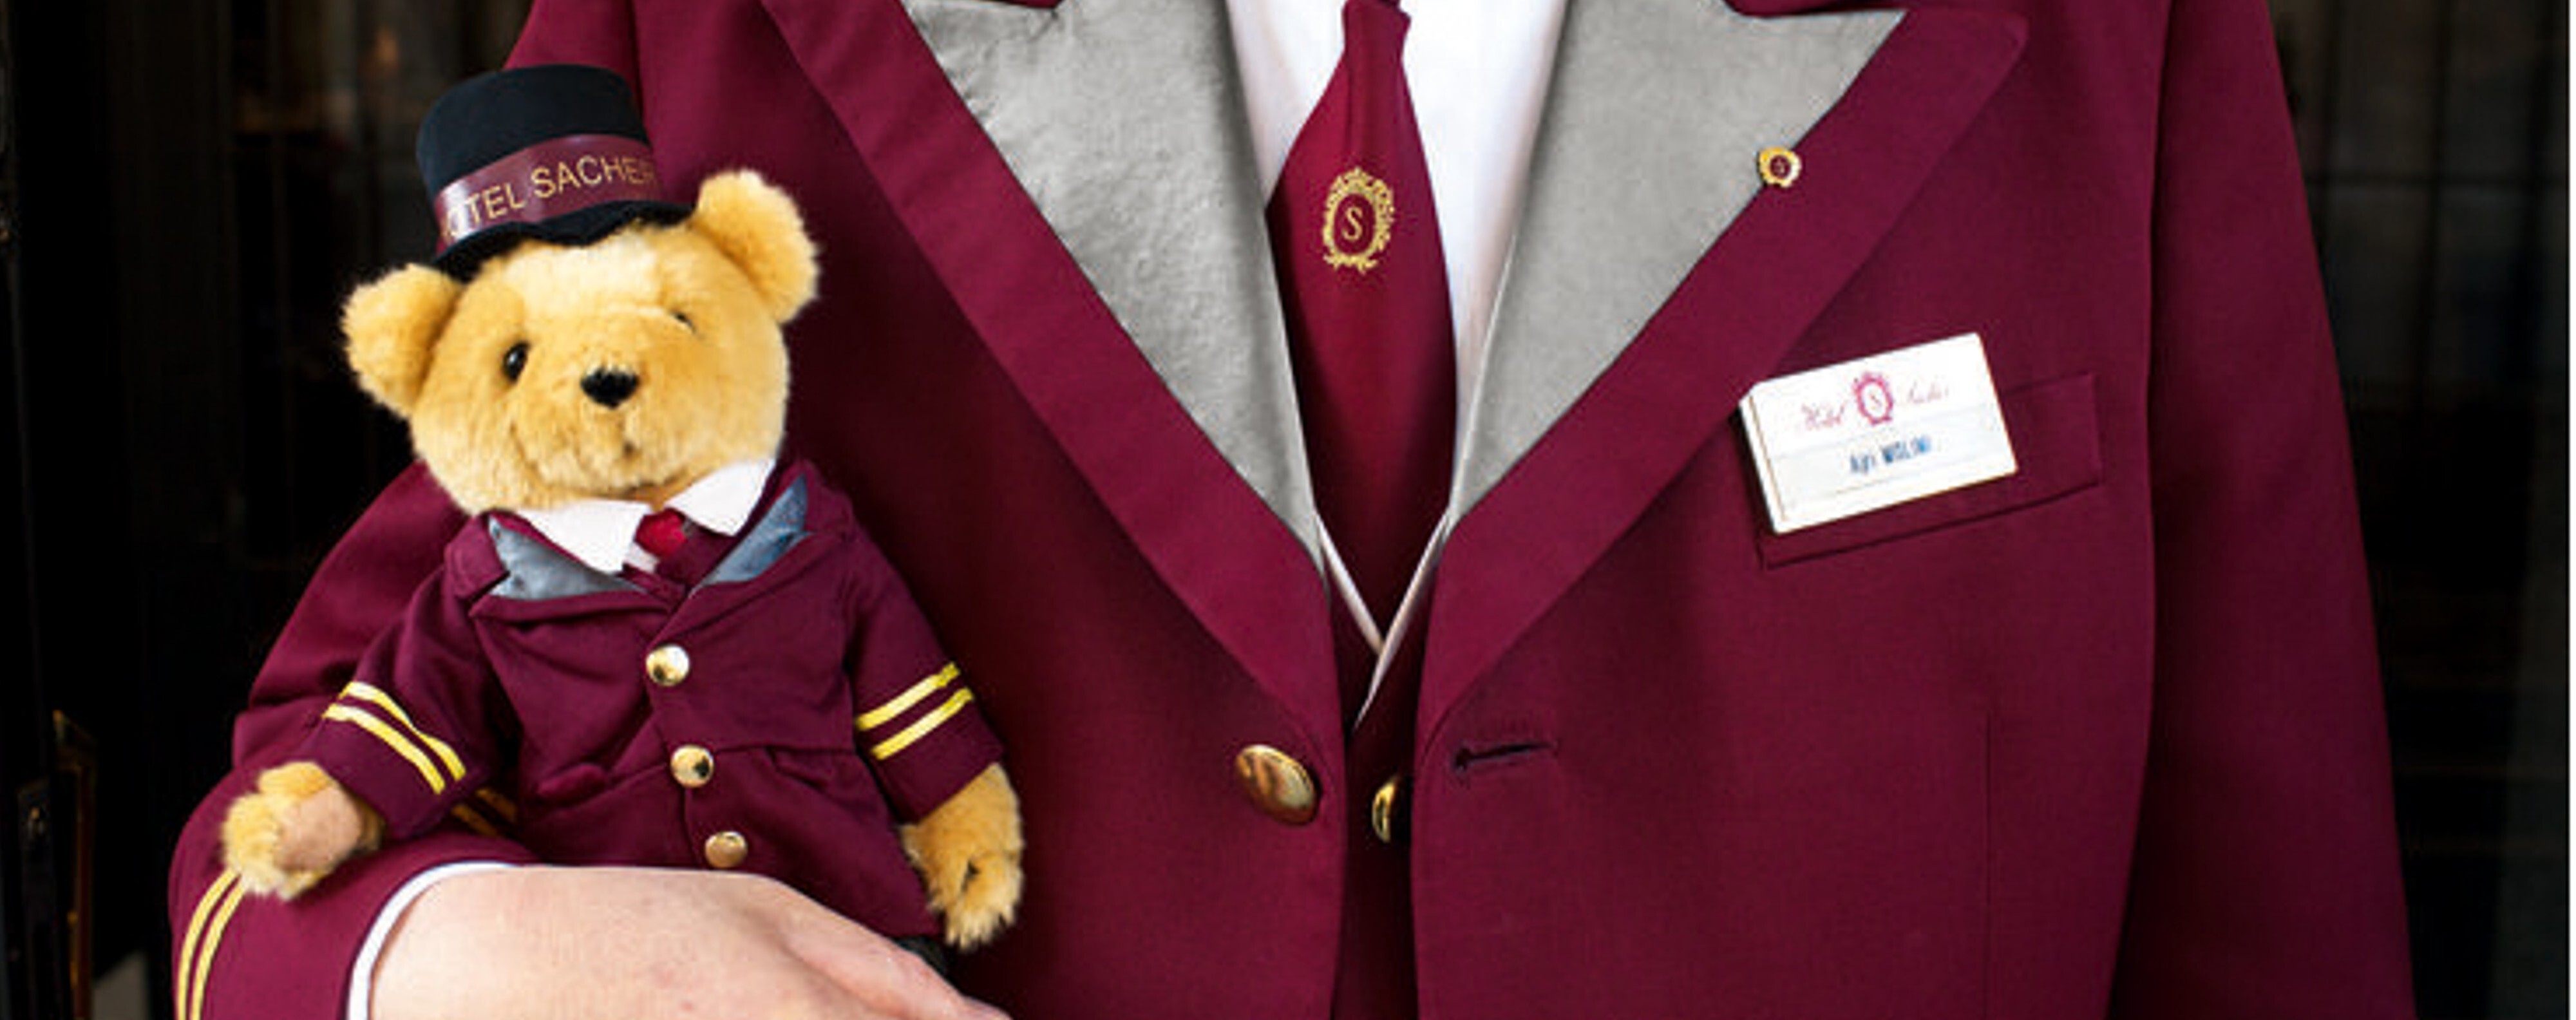 Why Luxury Teddy Bears are the Perfect Gift for Lockdown